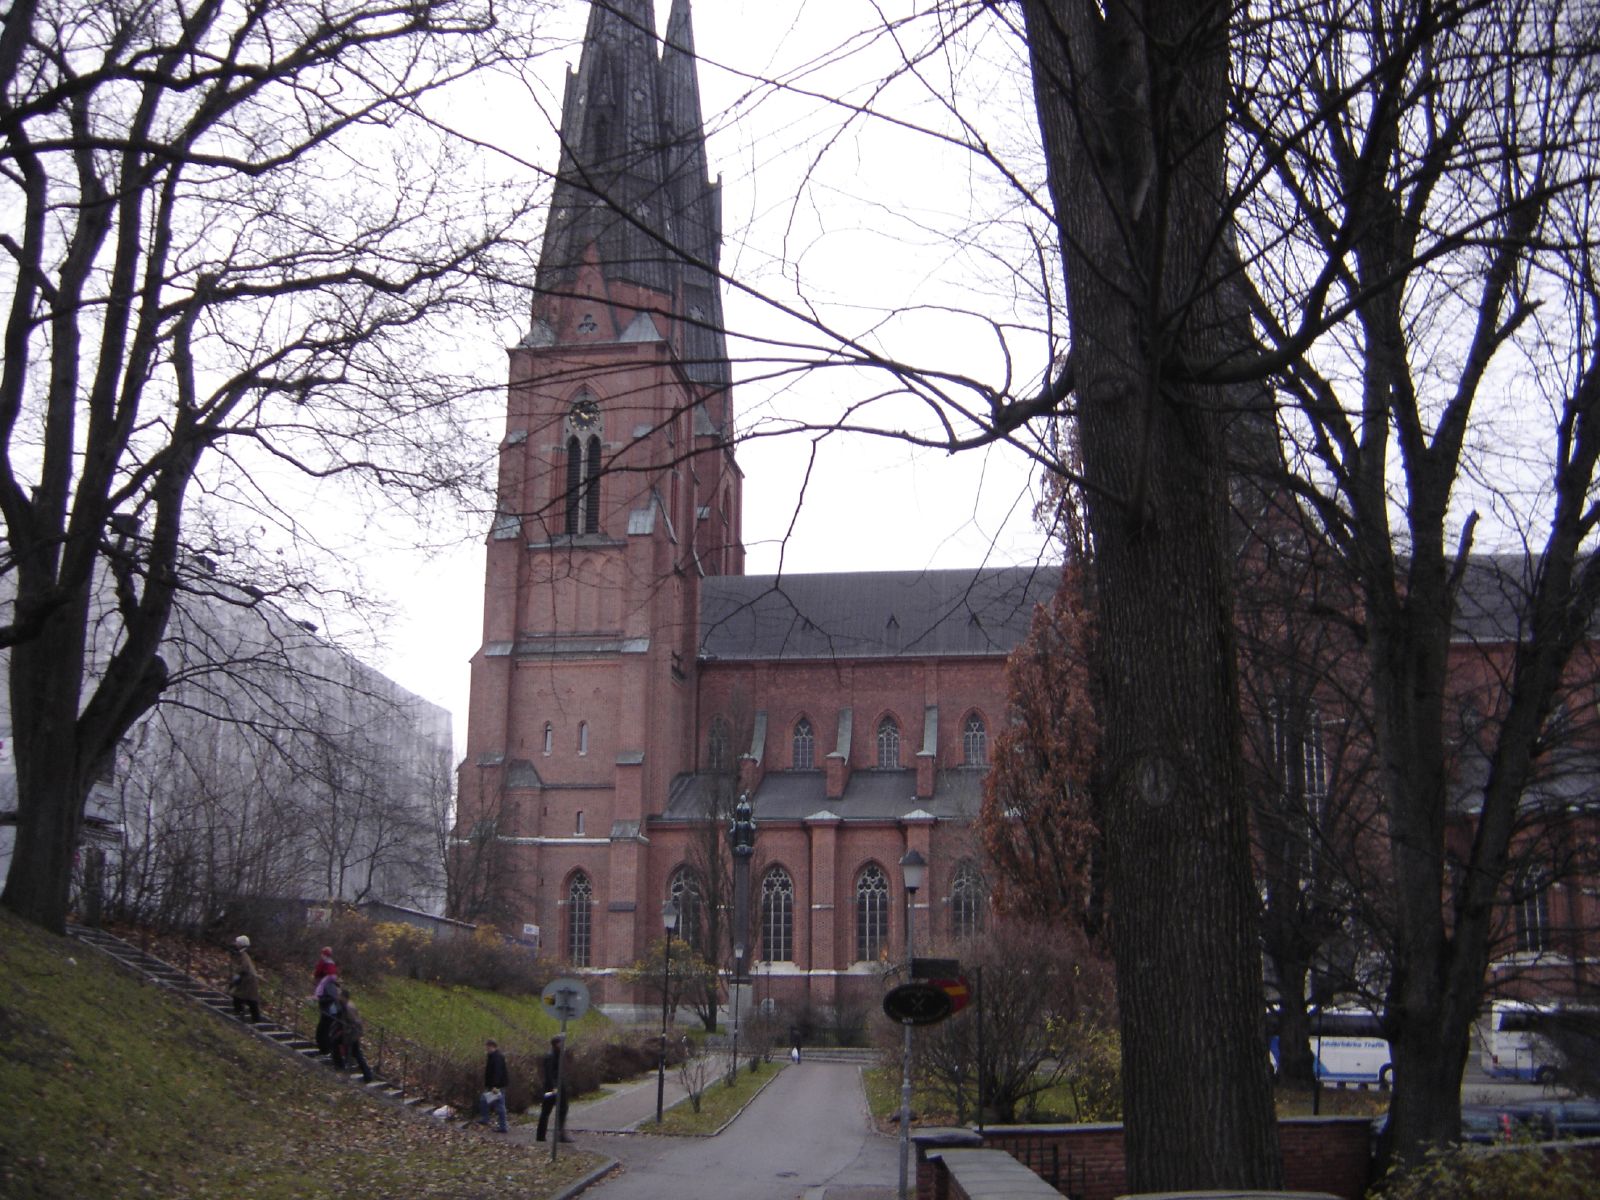 people on a path next to a tall brick church